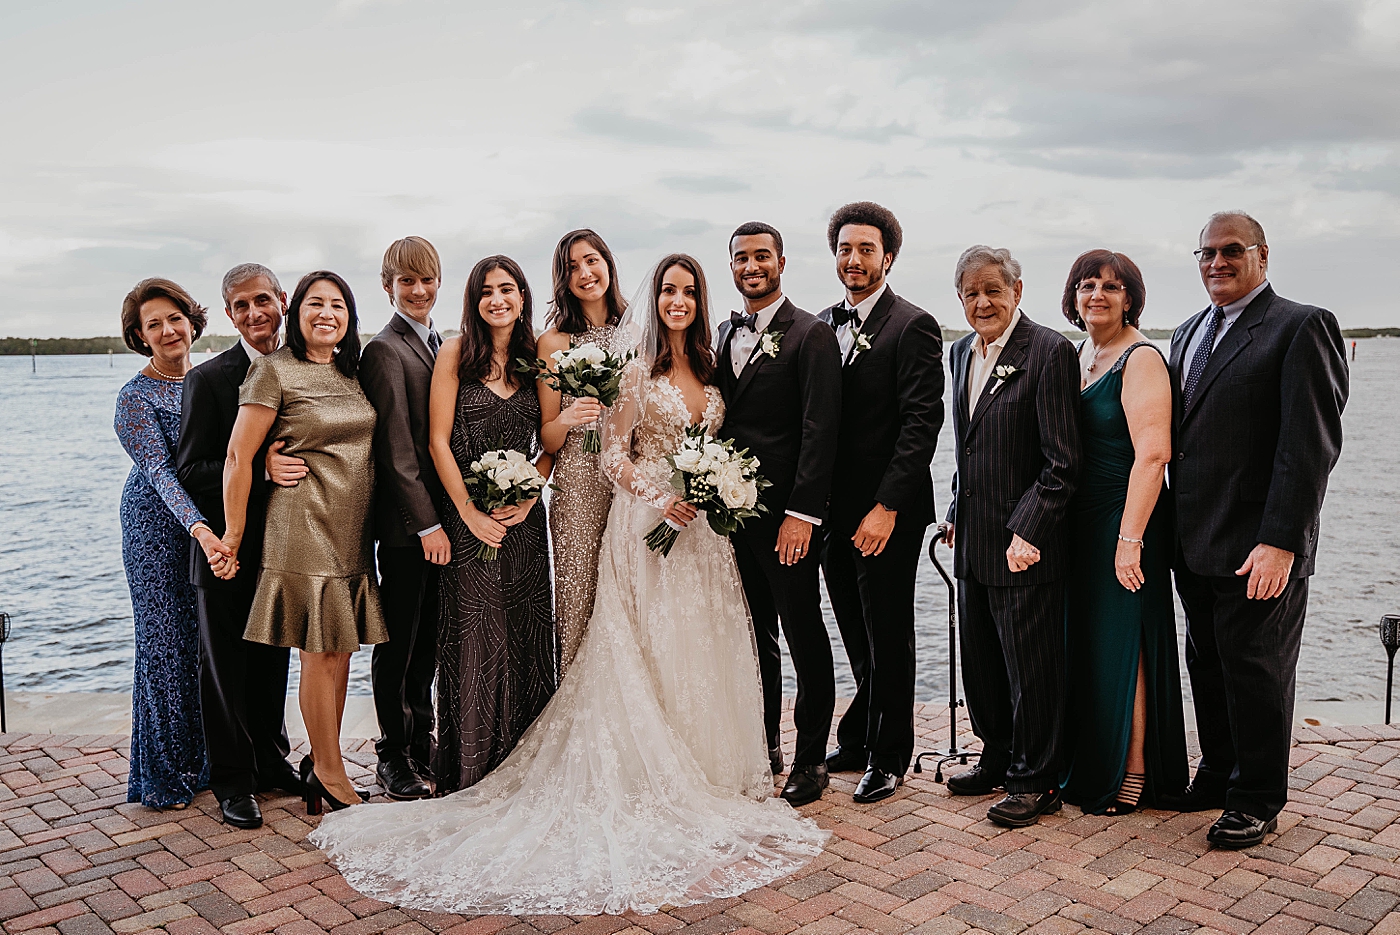 Family Portrait Intimate Home Wedding captured by South Florida Wedding Photographer Krystal Capone Photography